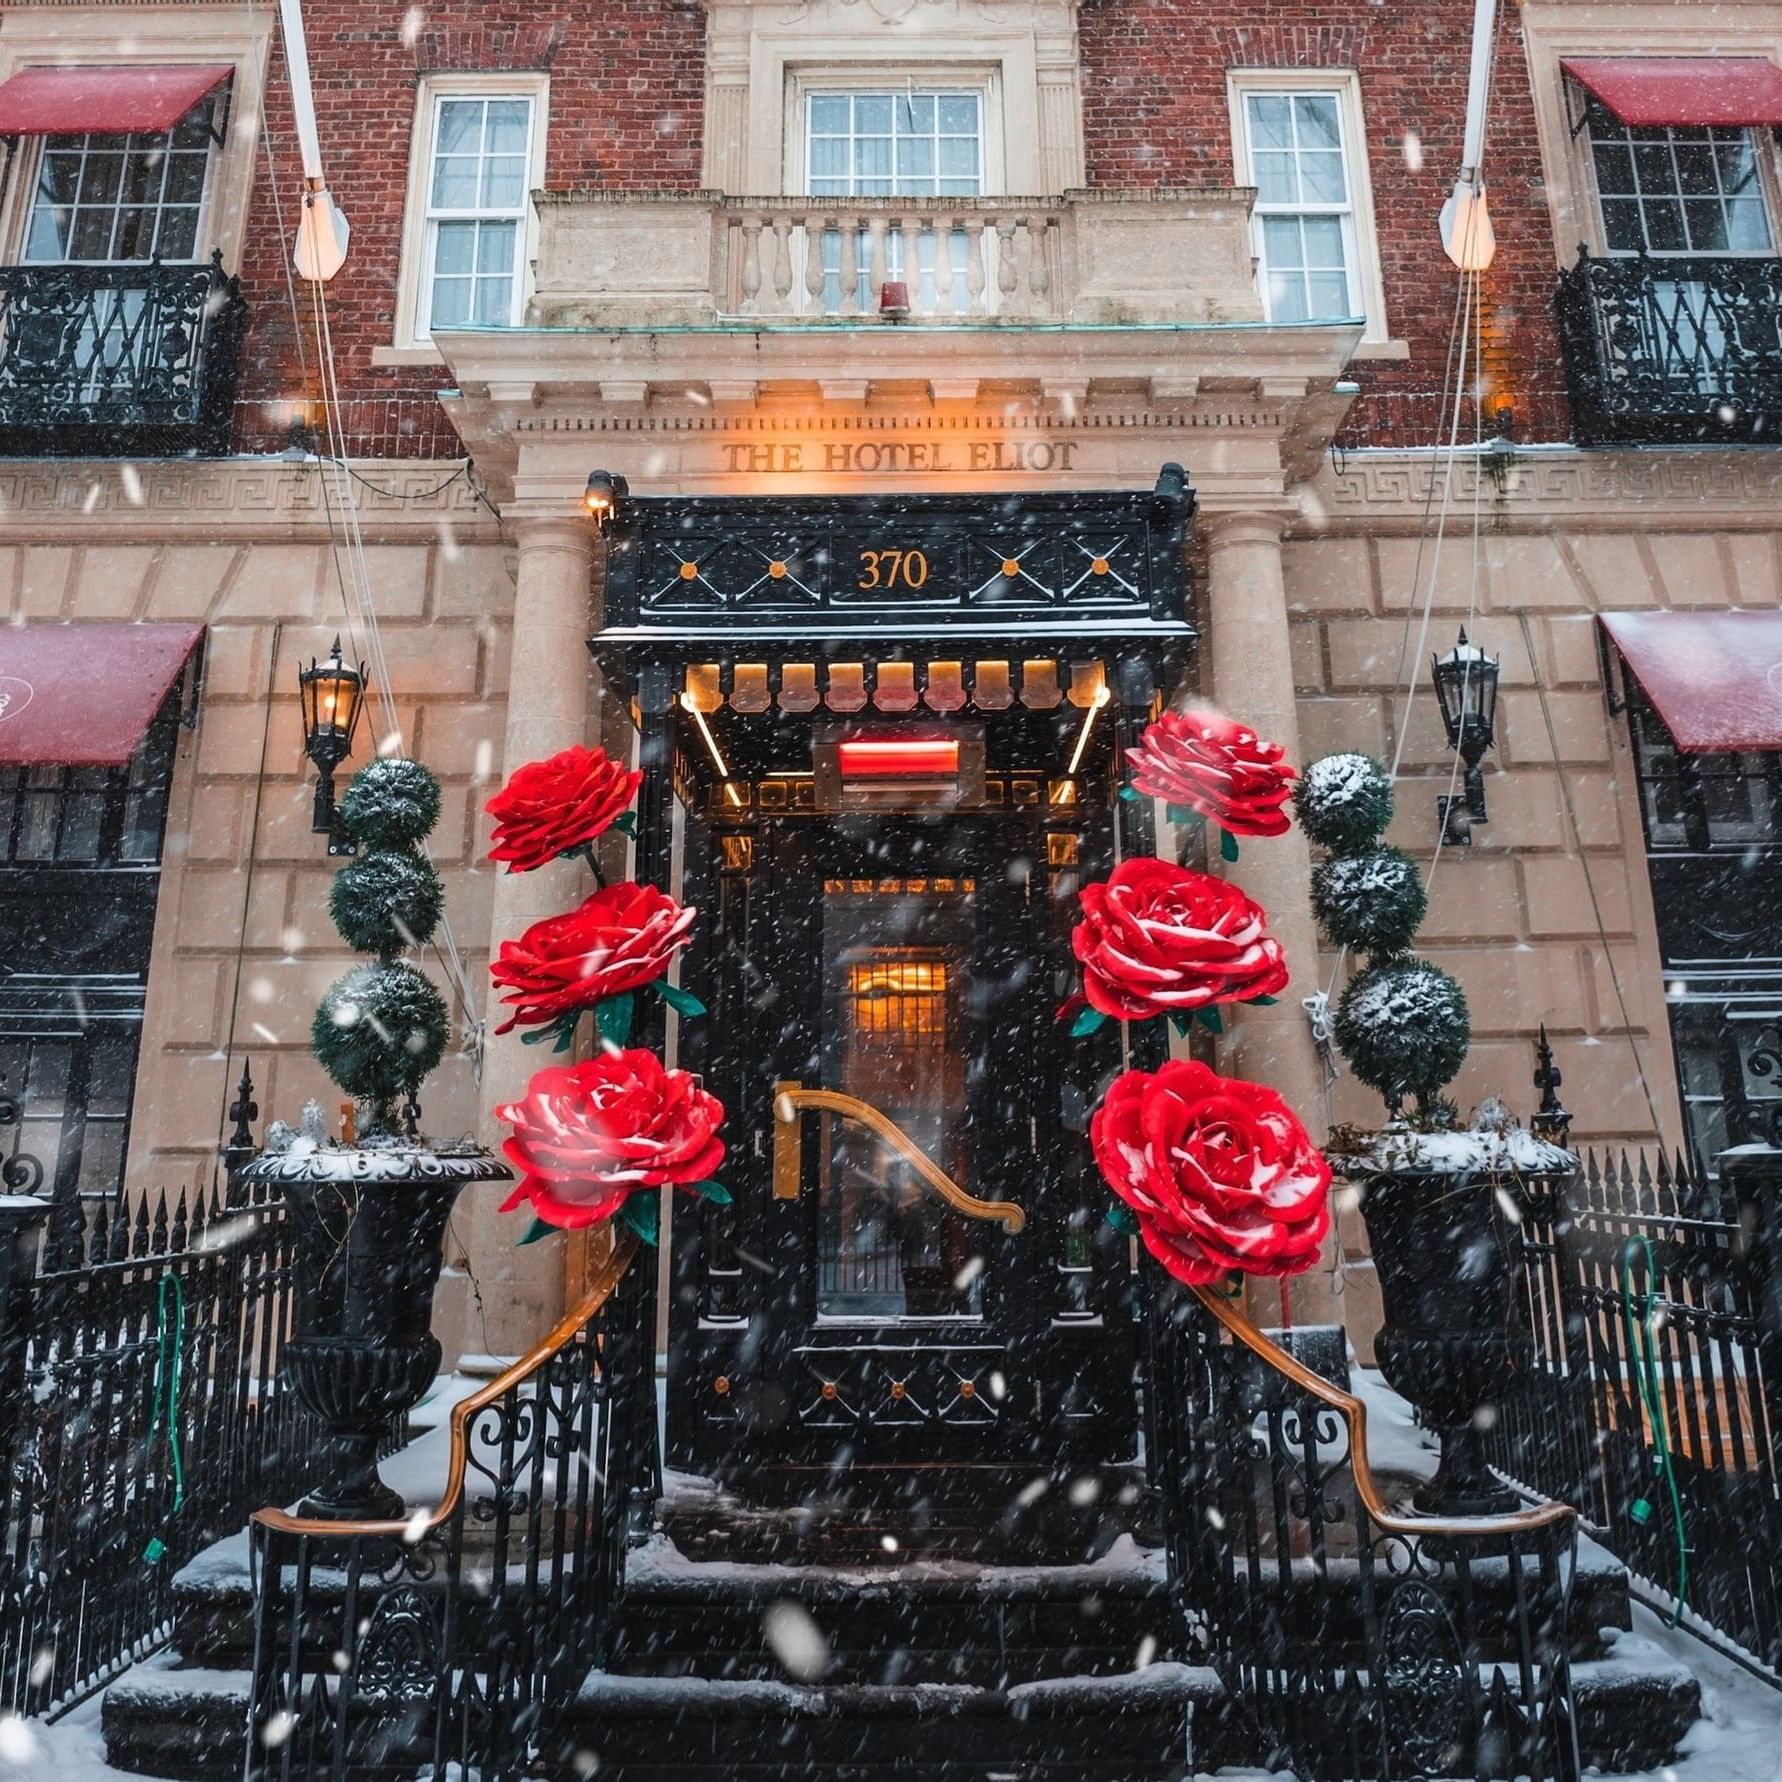 Red roses framing the entrance of The Eliot Hotel